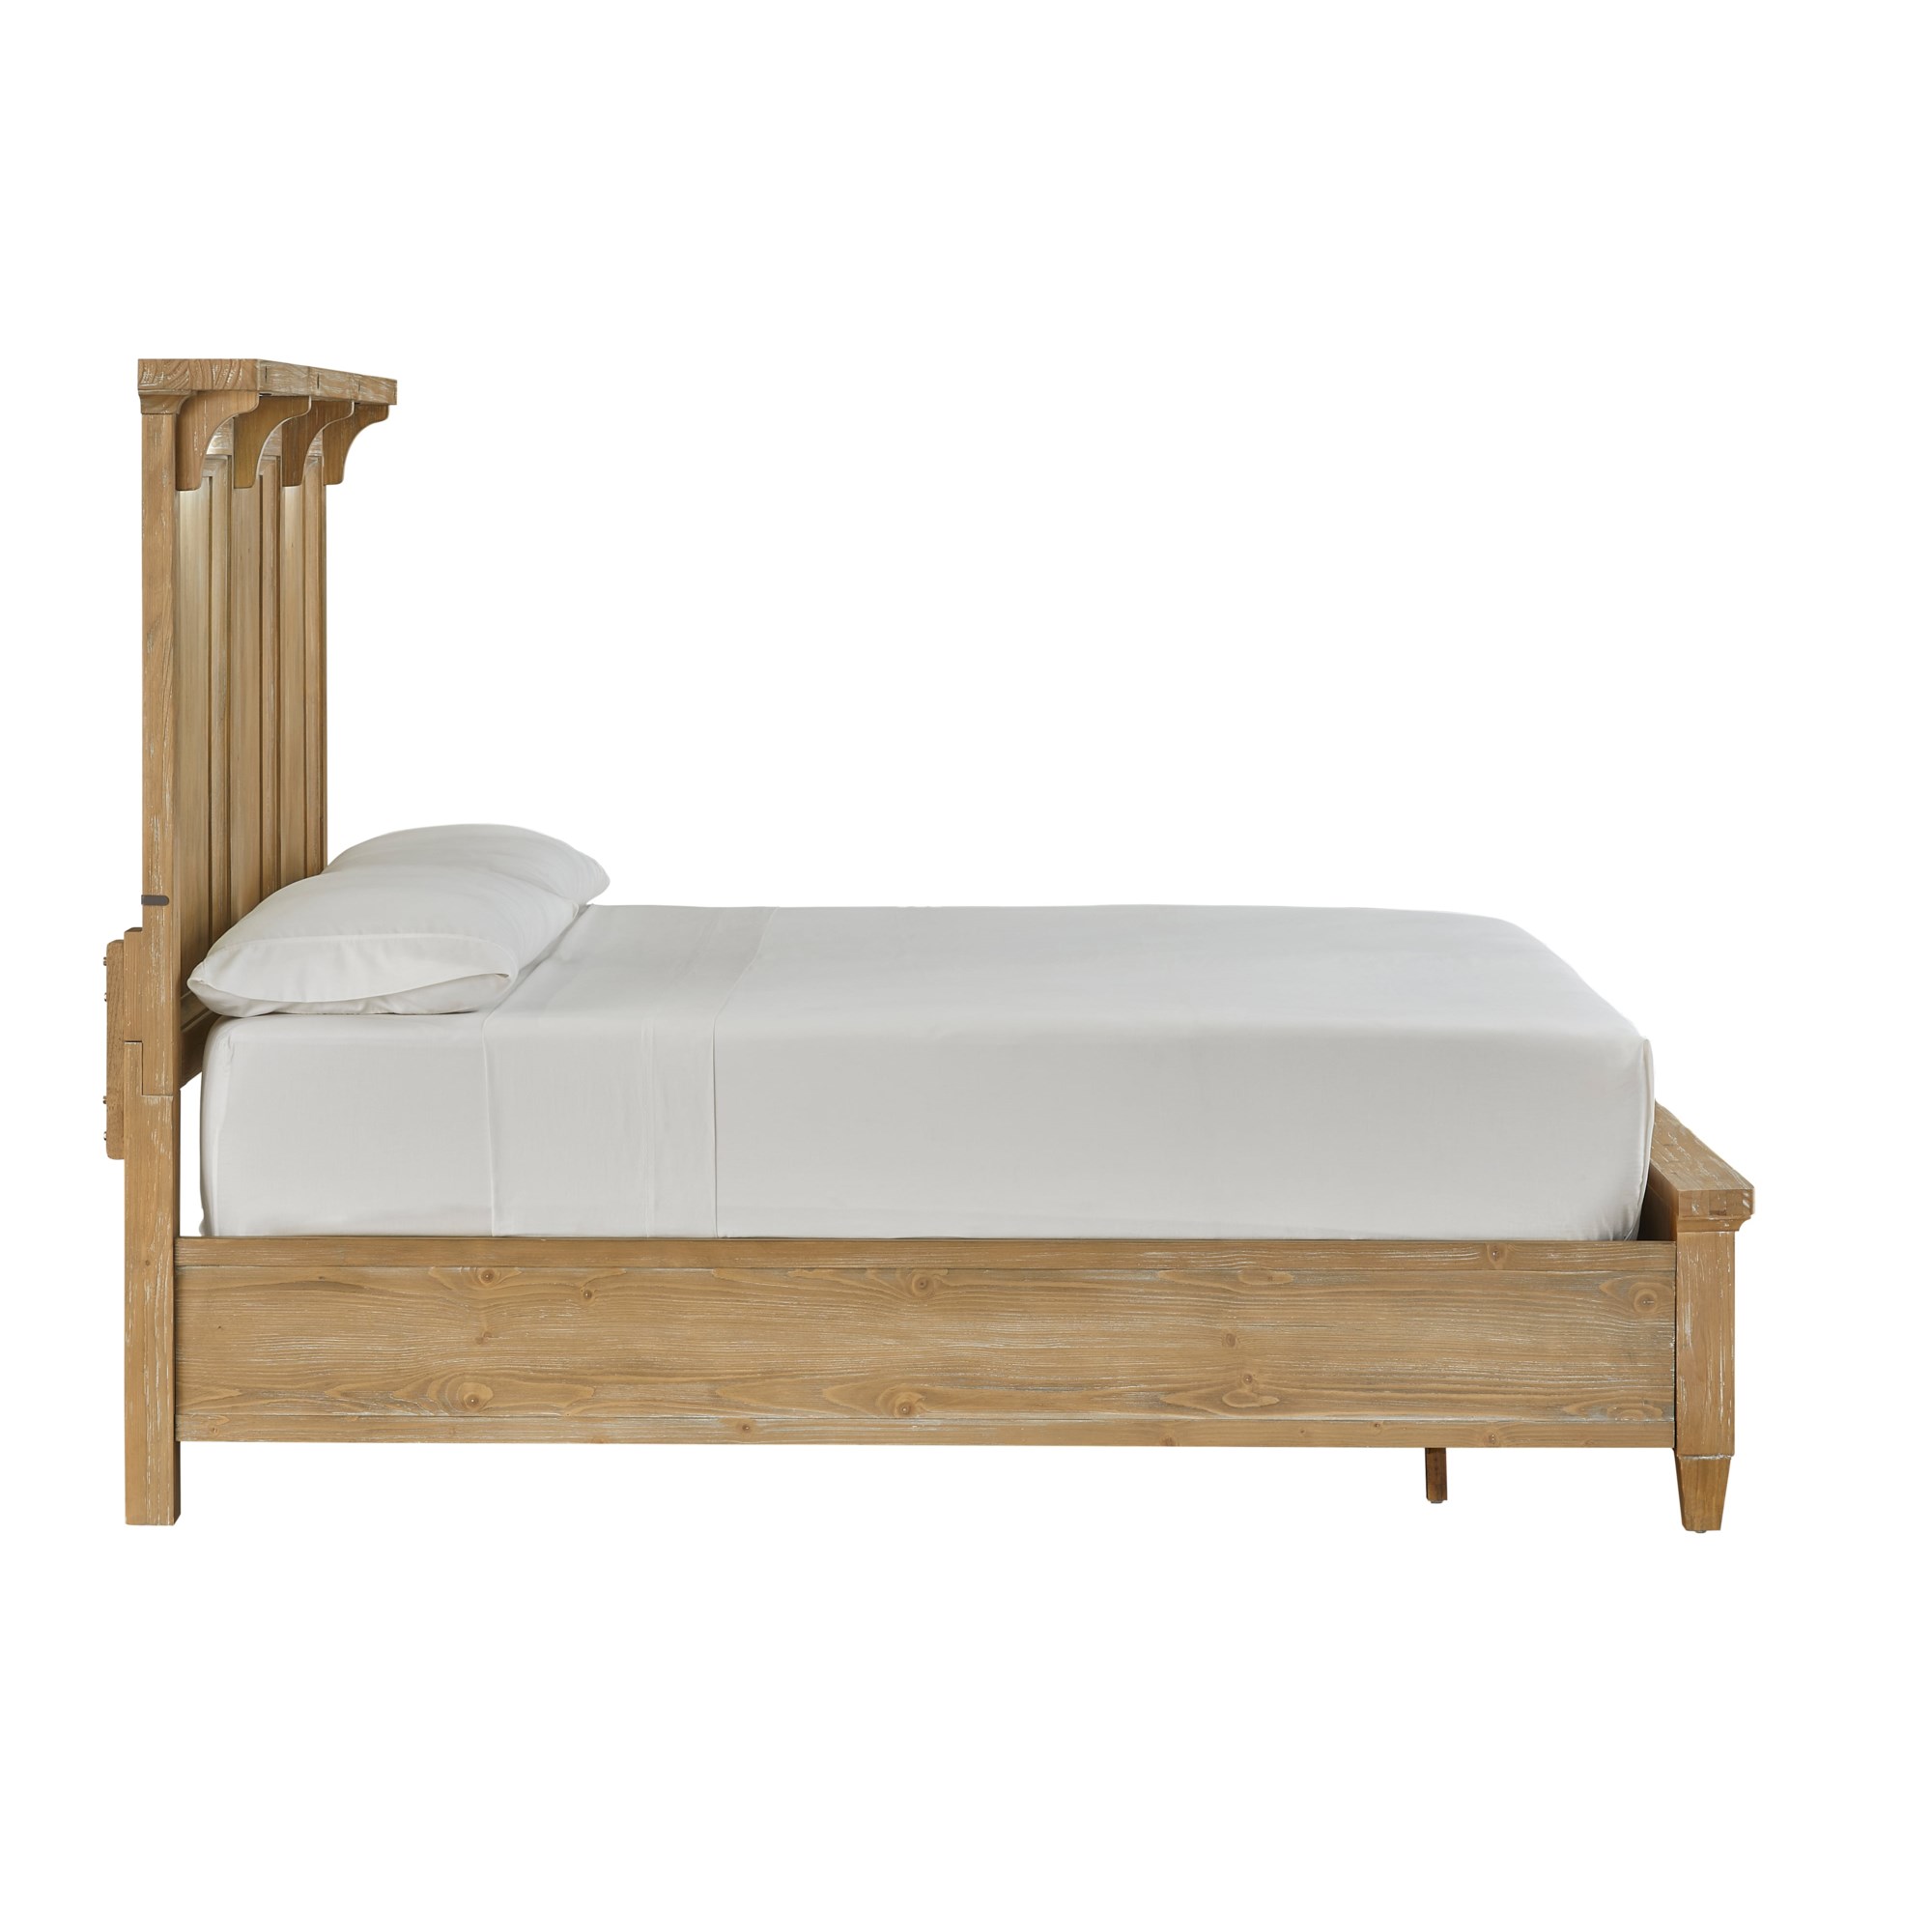 Bolt-On Bed Rails for Queen and King Beds - Cedar Hill Furniture